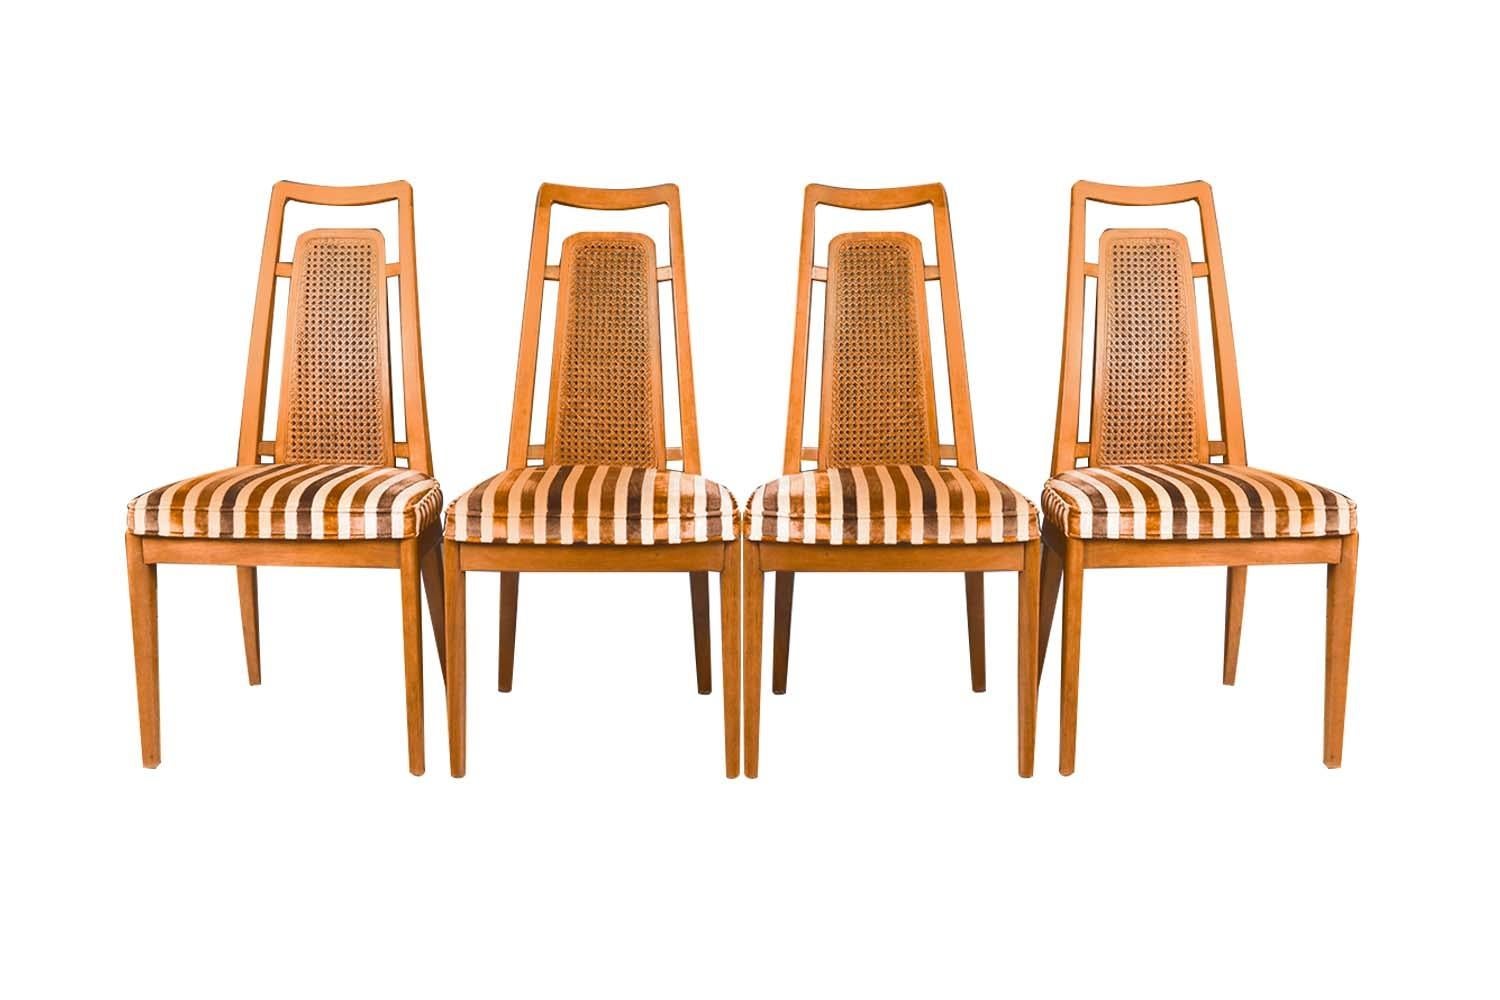 A set of six gorgeous, modern dining chairs designed by Drexel Heritage for Drexel’s Meridian Collection, circa 1960’s. The pecan cane frames feature modern styling with a distinct beautiful design. Sculpturally carved and woven caned backrests with